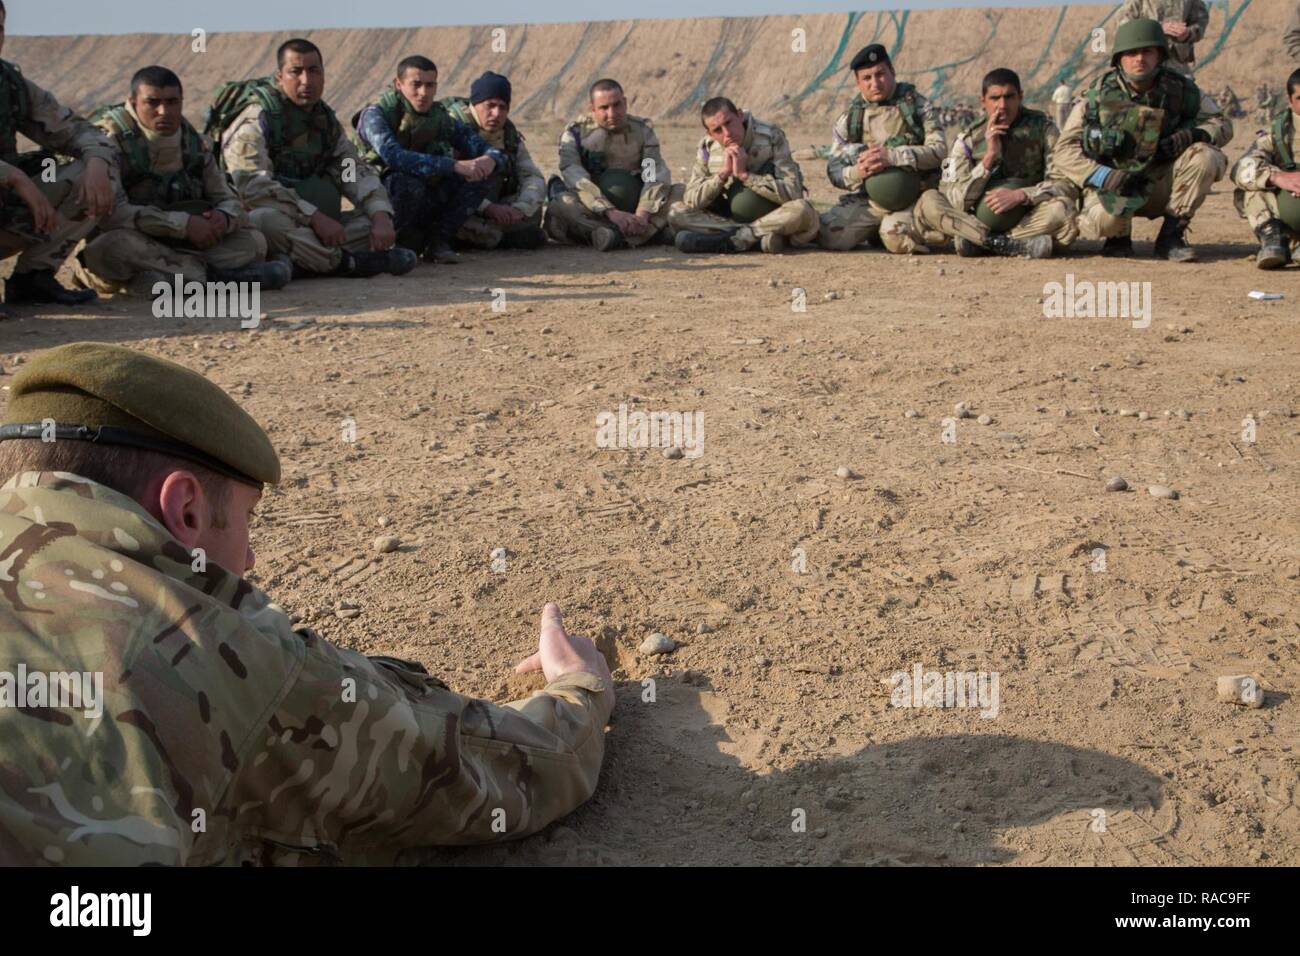 A British soldier demonstrates how to properly expose a simulated improvised explosive device to Iraqi security forces soldiers at Camp Taji, Iraq, Jan. 19, 2017. This training is critical to enabling ISF to counter ISIL as they continue to liberate their homeland. Coalition forces conducted the training in support of Combined Joint Task Force – Operation Inherent Resolve, the global Coalition to defeat ISIL in Iraq and Syria. Stock Photo